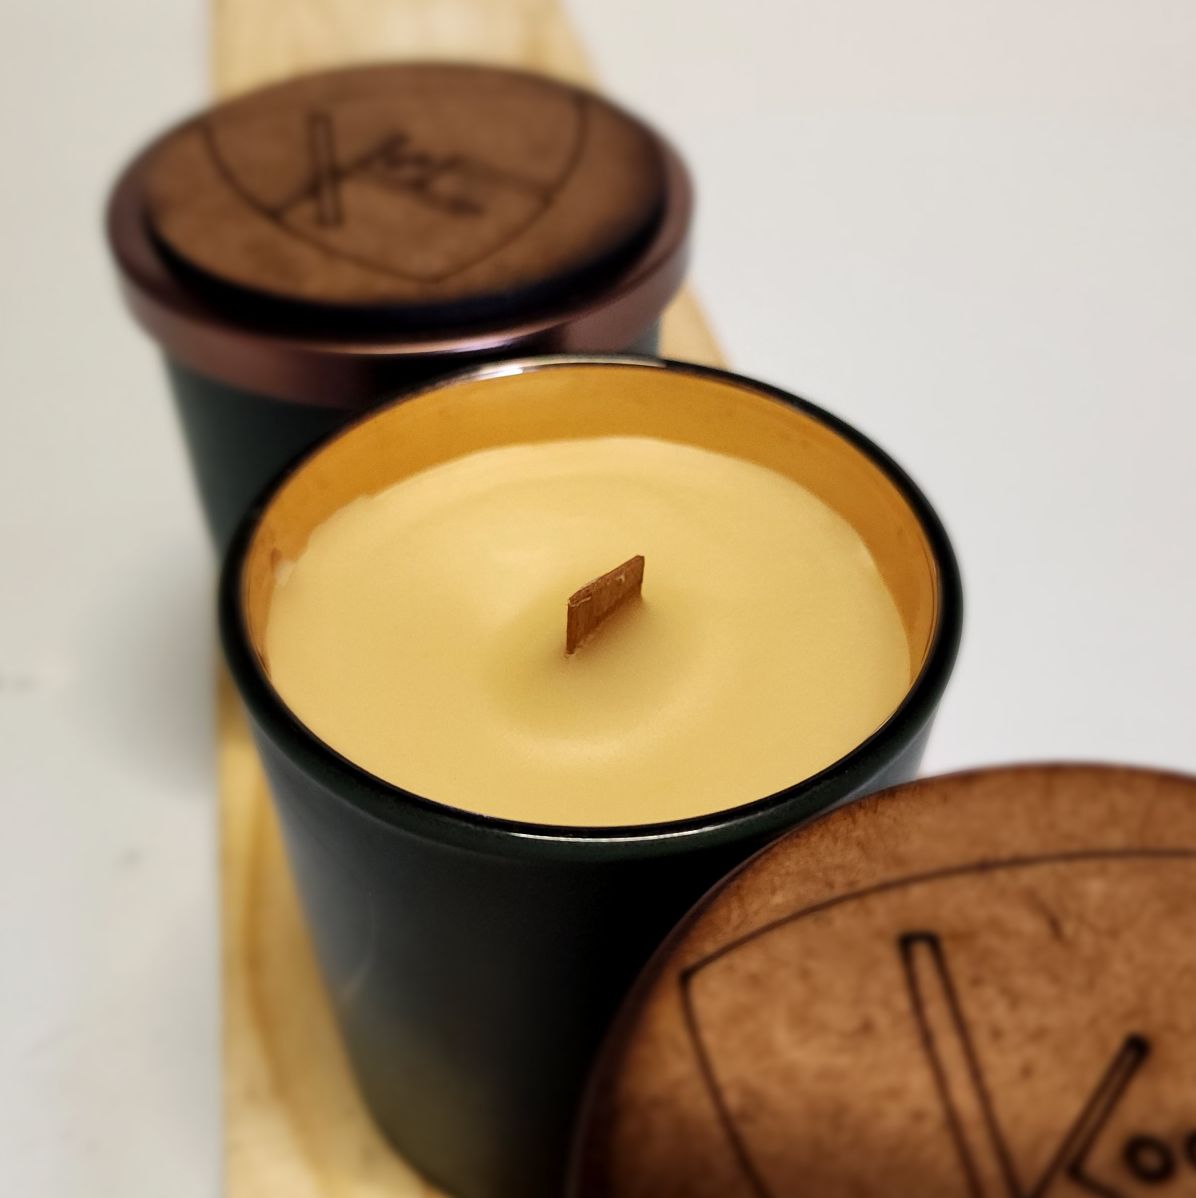 Beeswax Candle with Wooden Wick - Heartwood wildflowers and